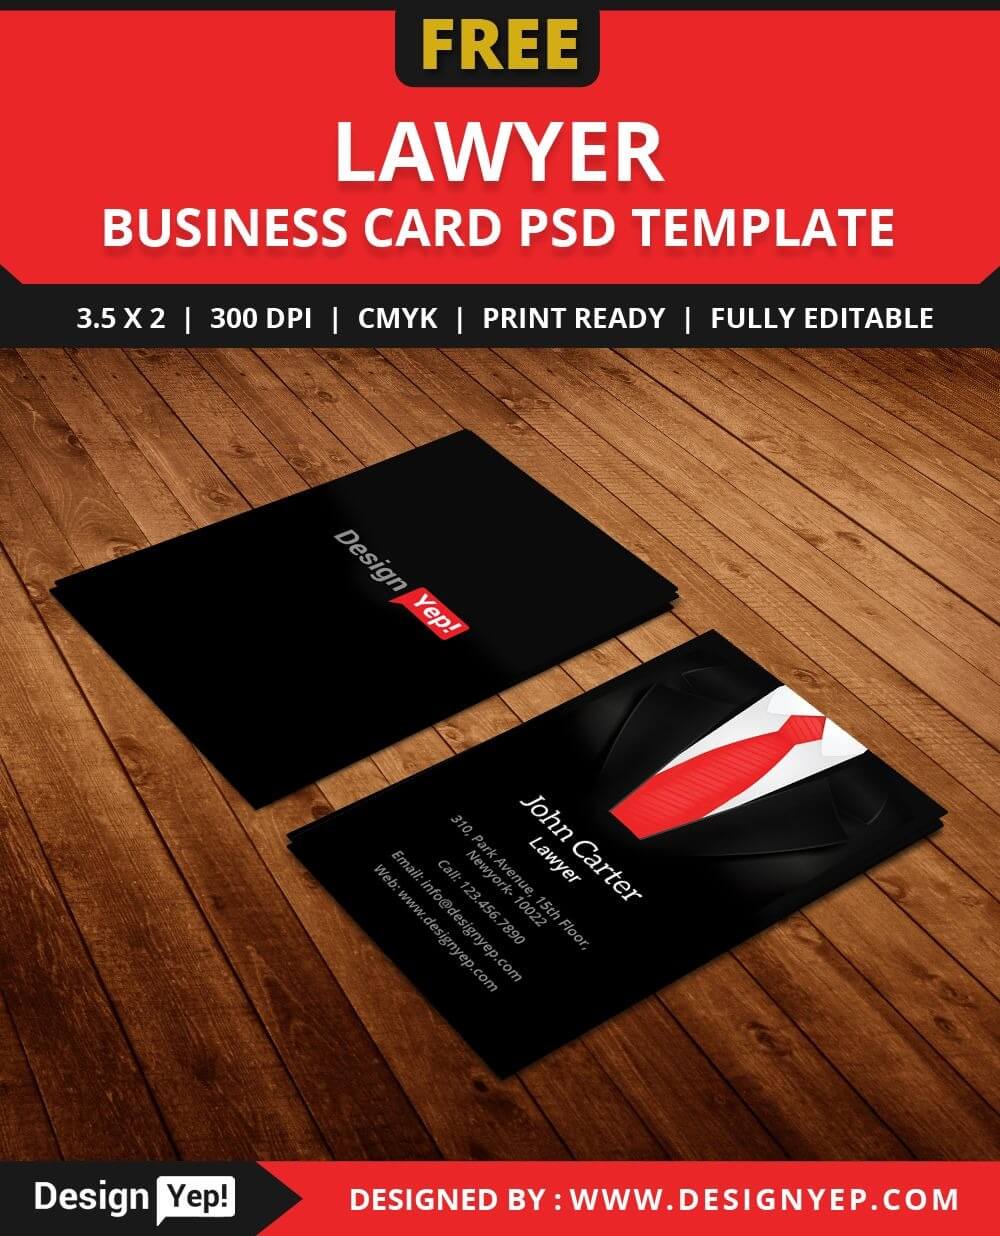 Free Lawyer Business Card Template Psd | Lawyer Business In Calling Card Free Template